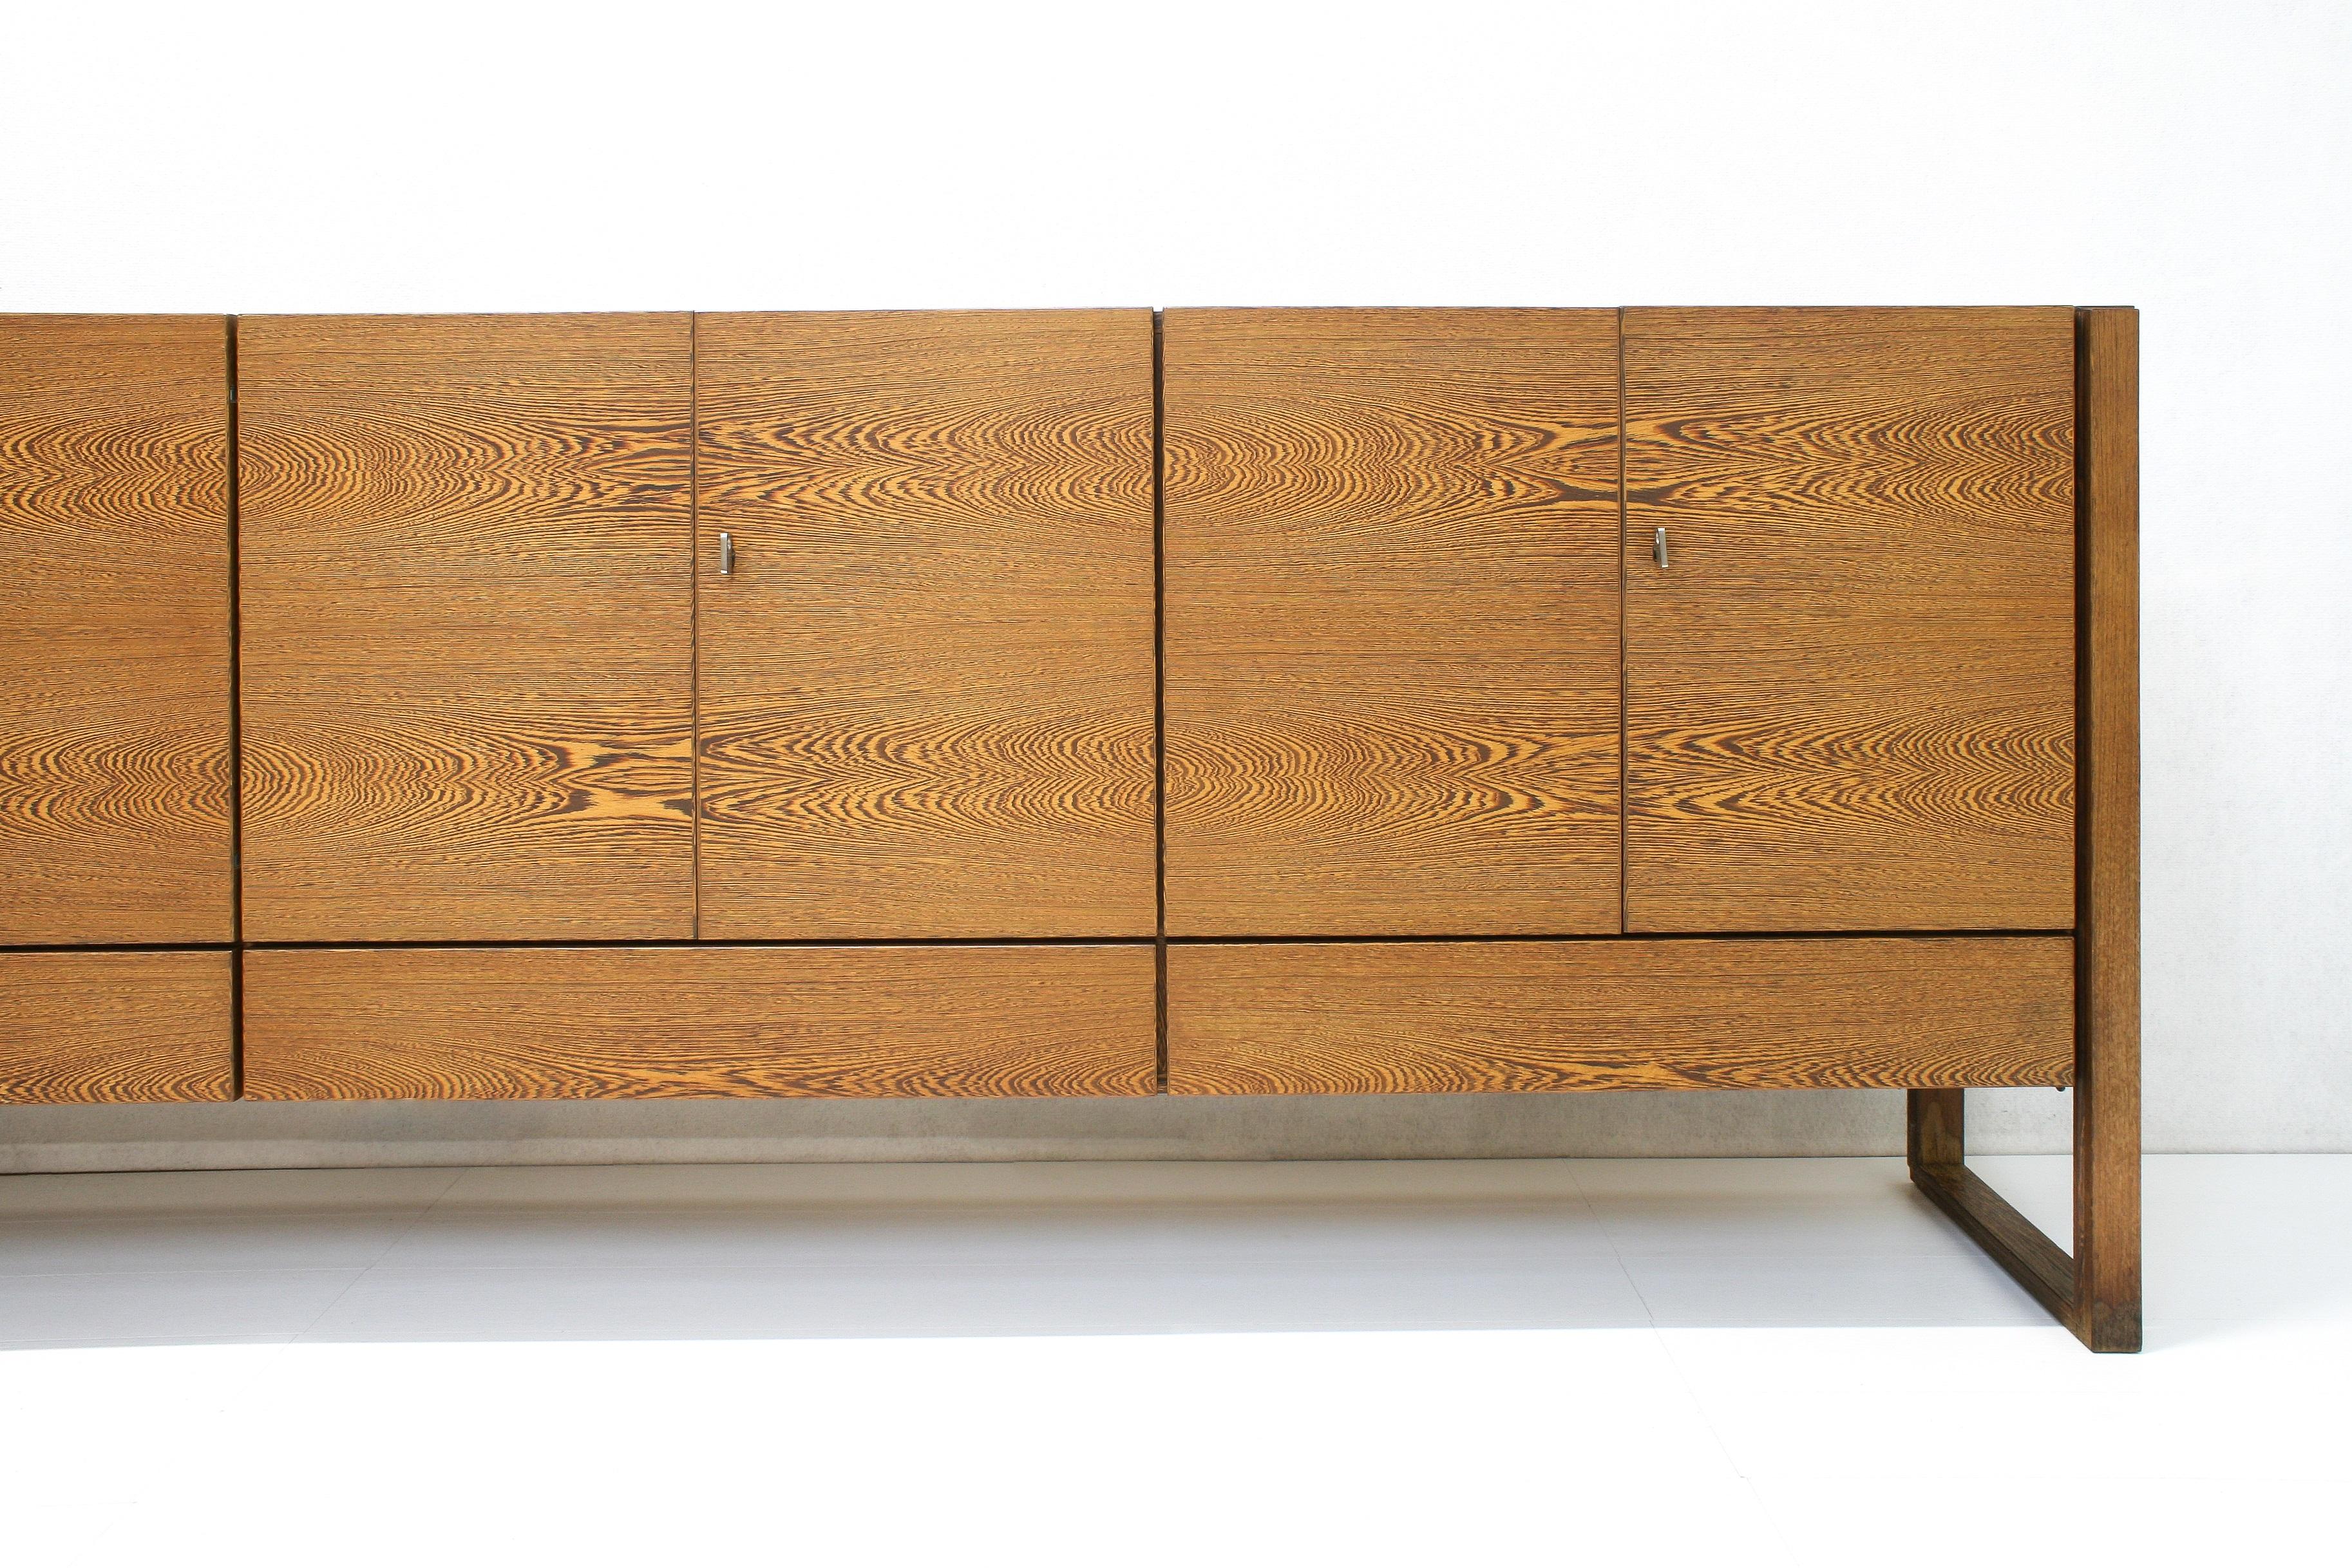 Sled Base Sideboard in Wengé from N-Line International, Belgium, 1970s For Sale 1